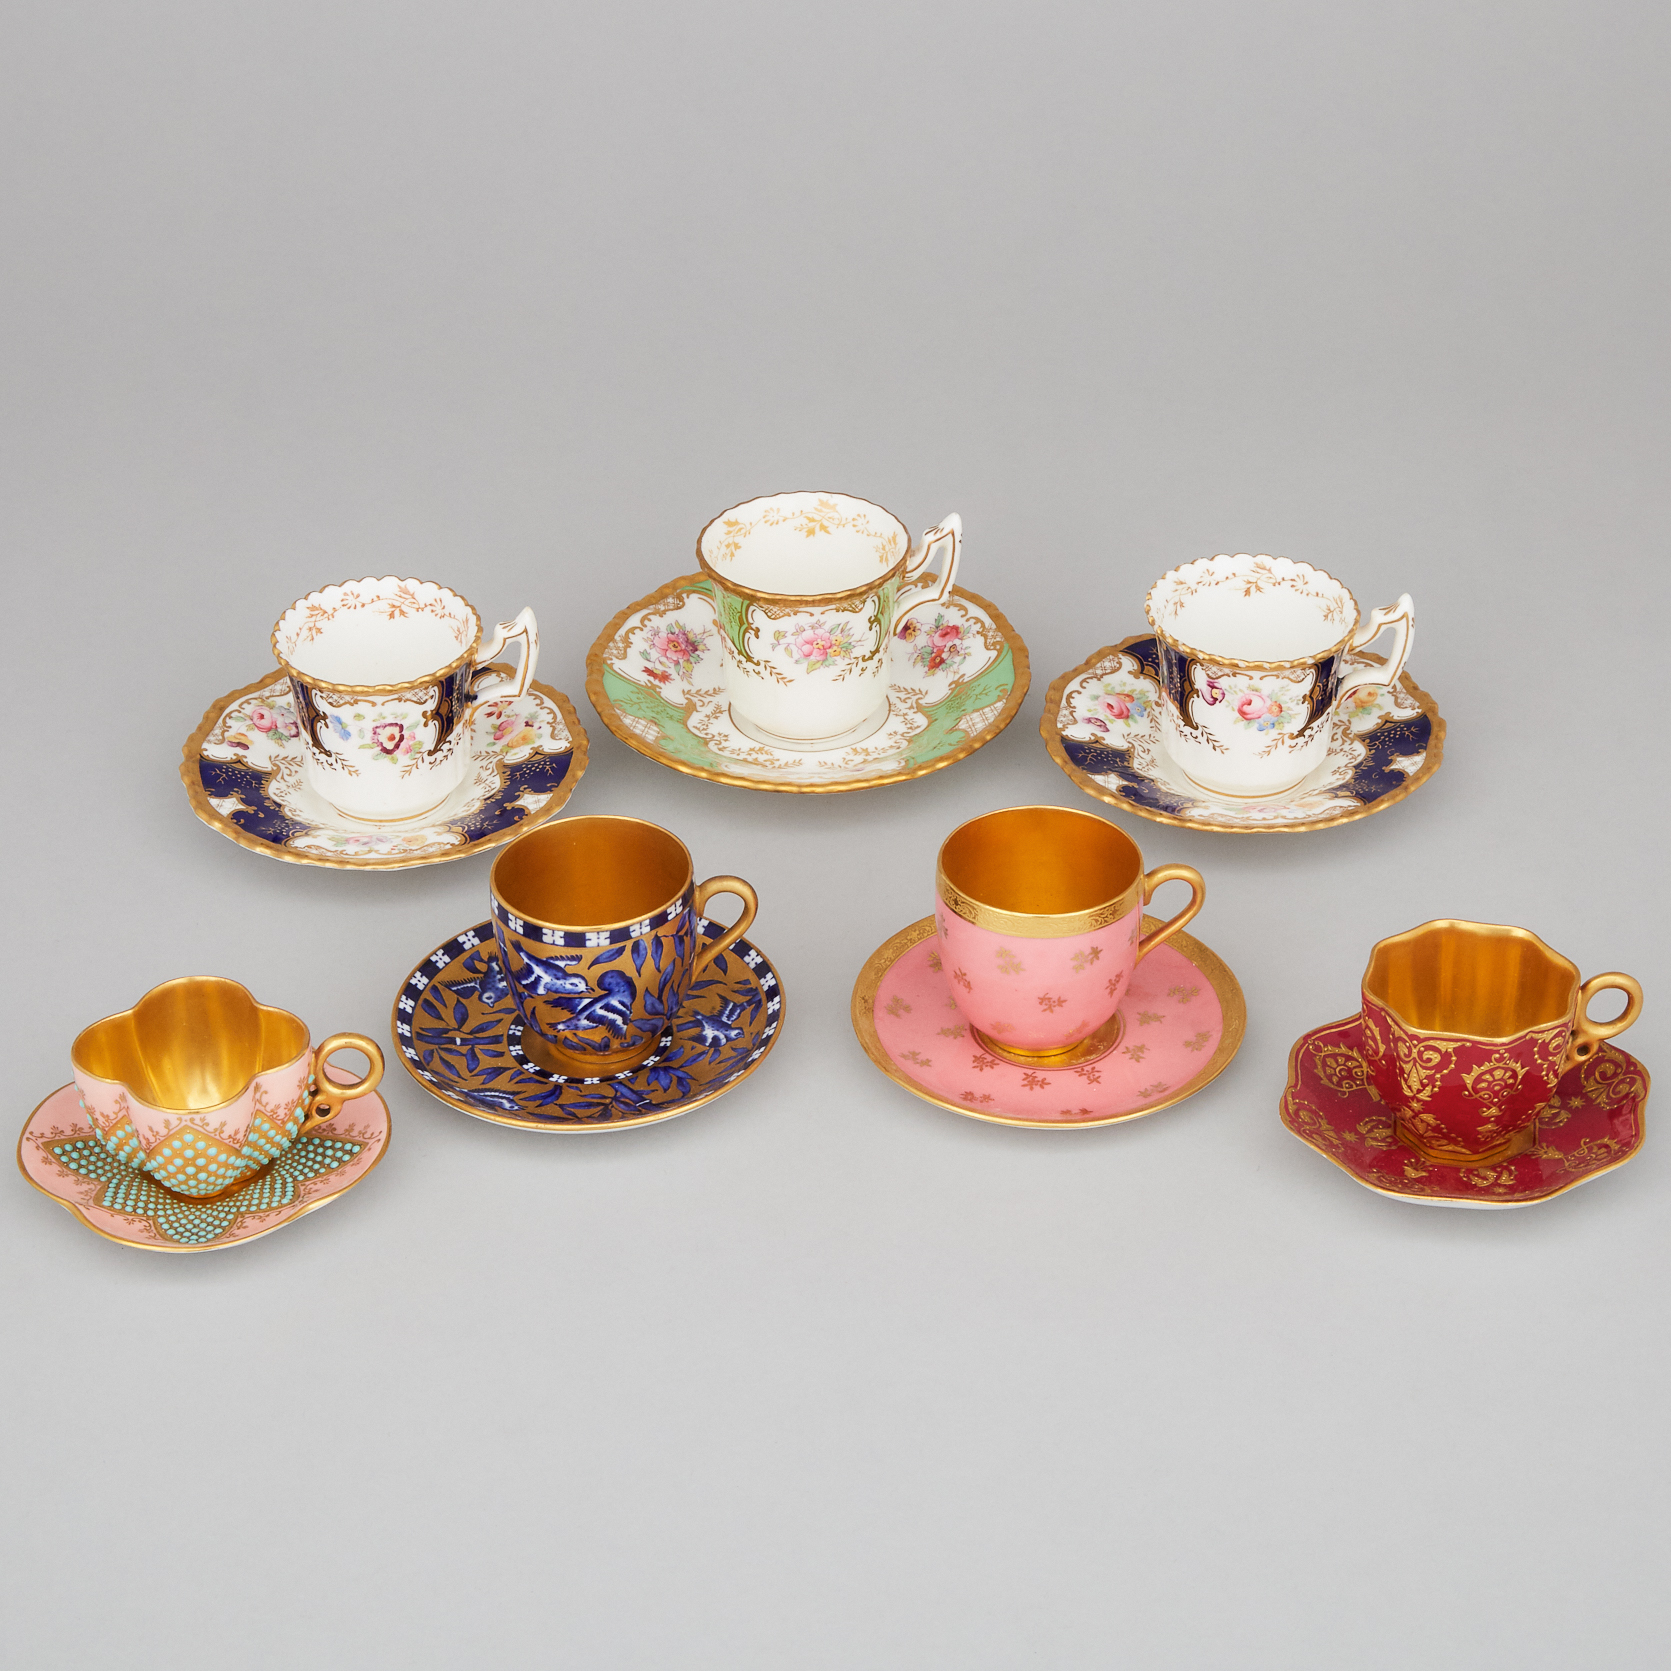 Seven Coalport Demi-Tasse Cups and Saucers, early 20th century